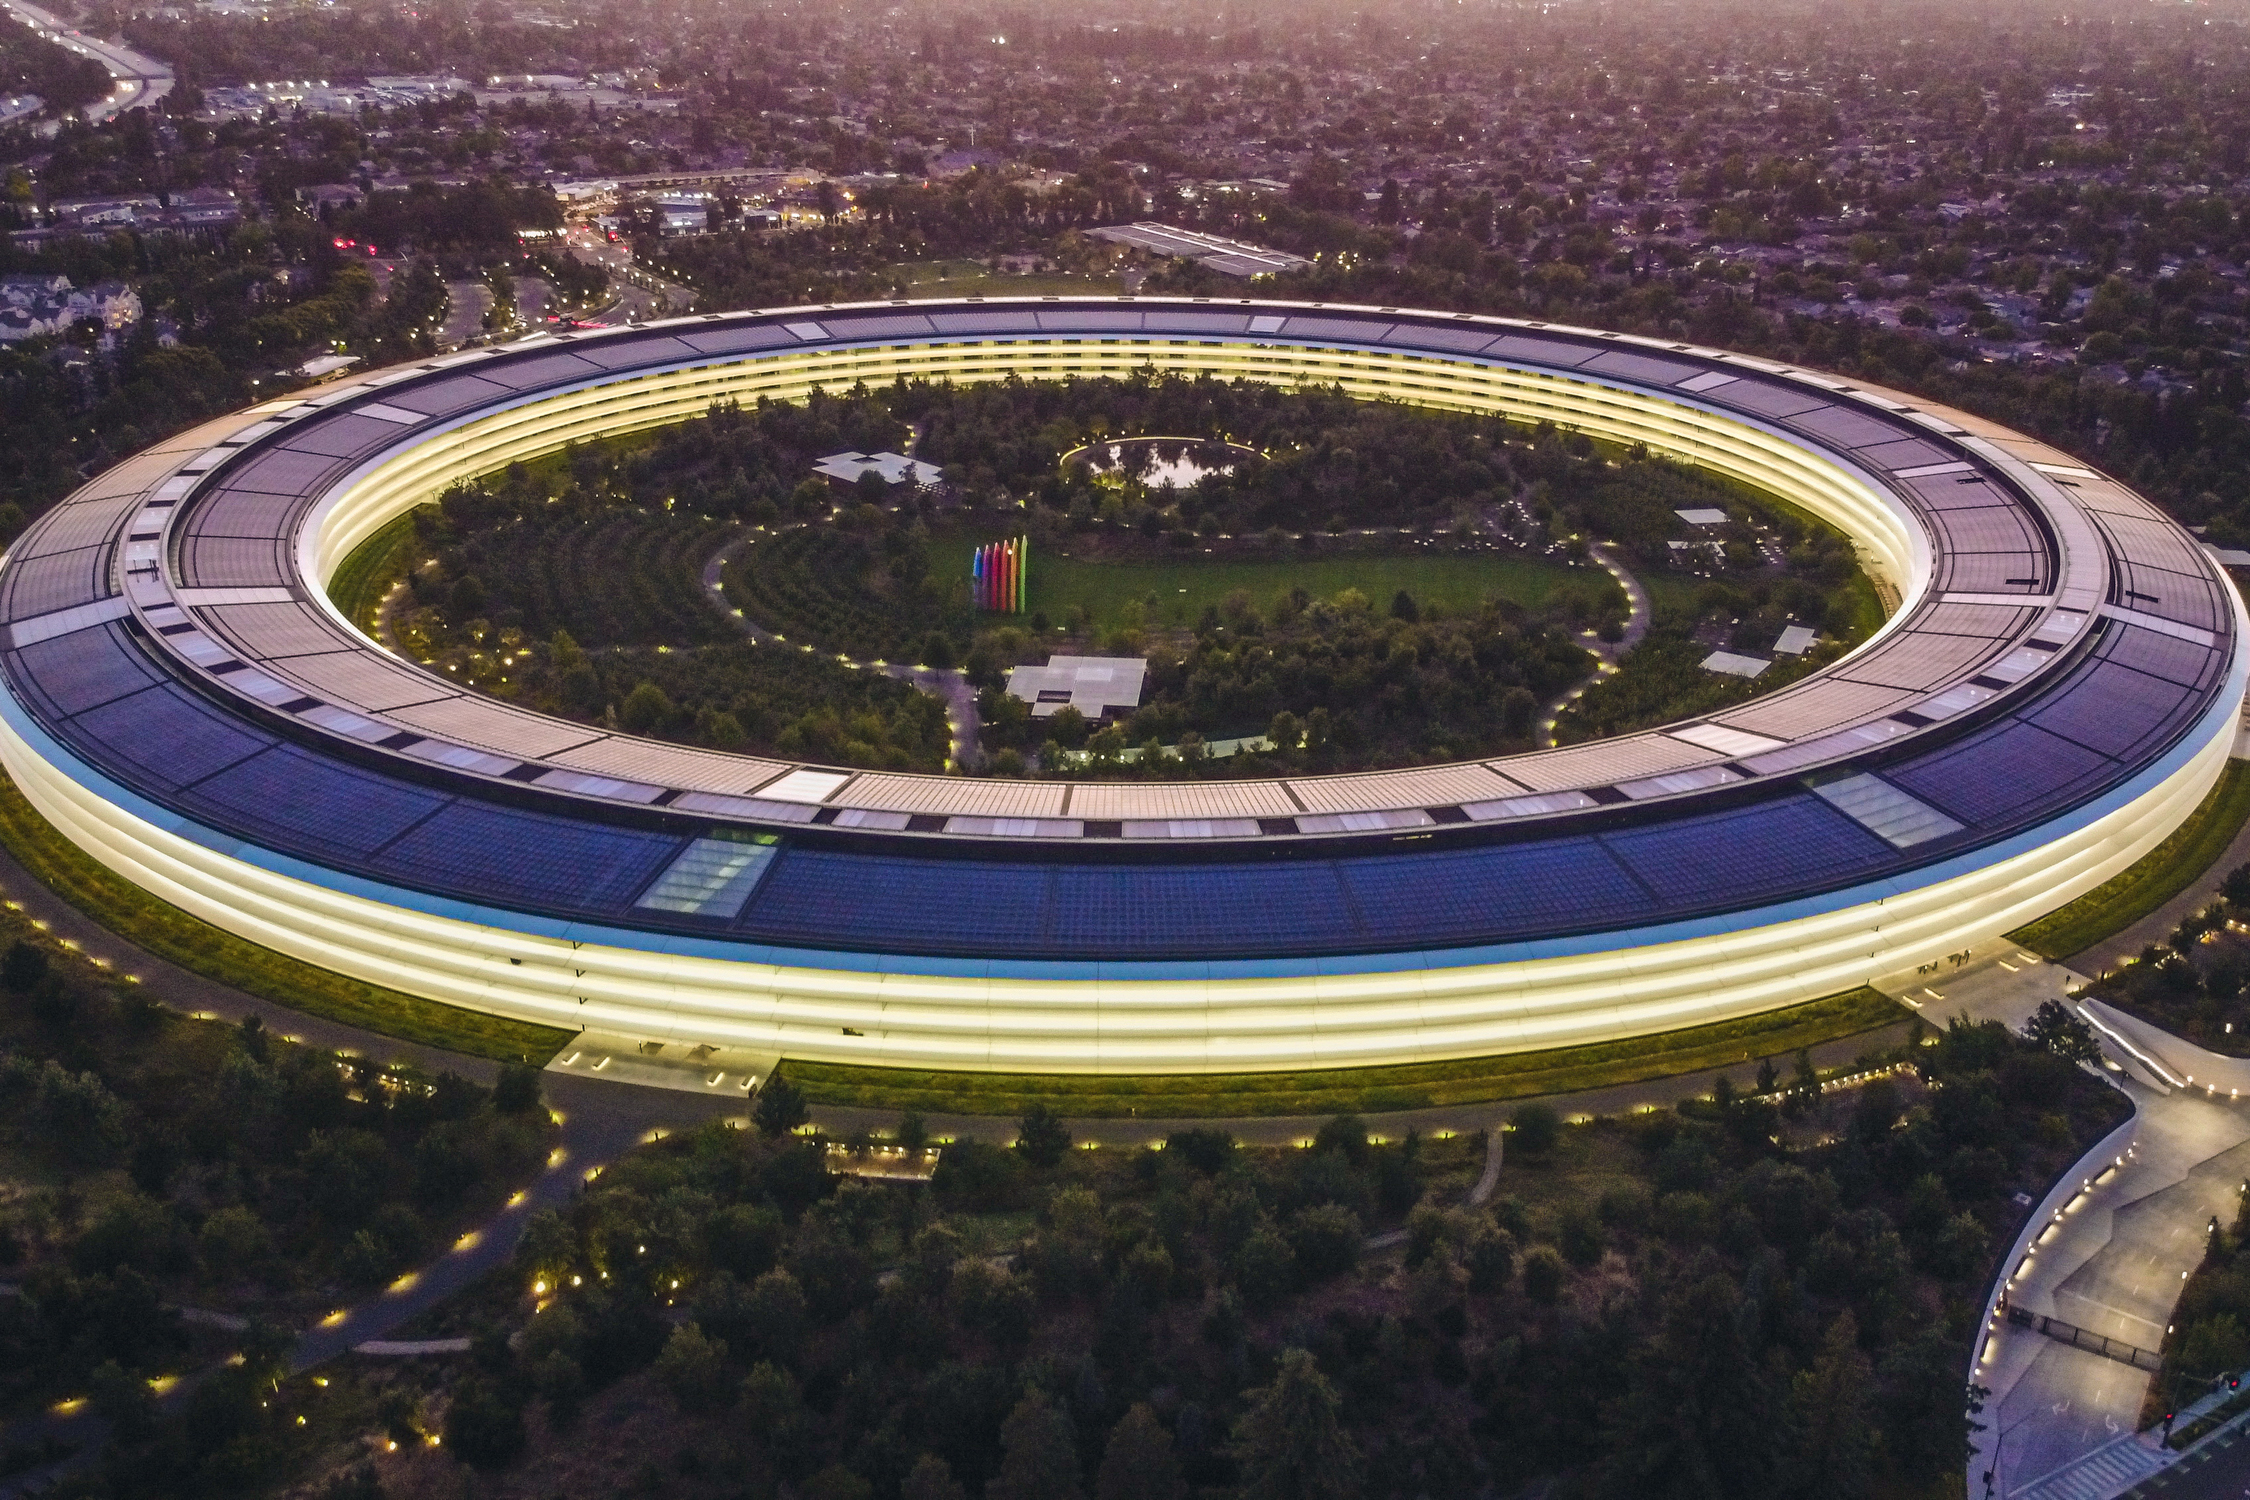 APPLE HEADQUARTERS - Tired: New ecosystem removes big tech -